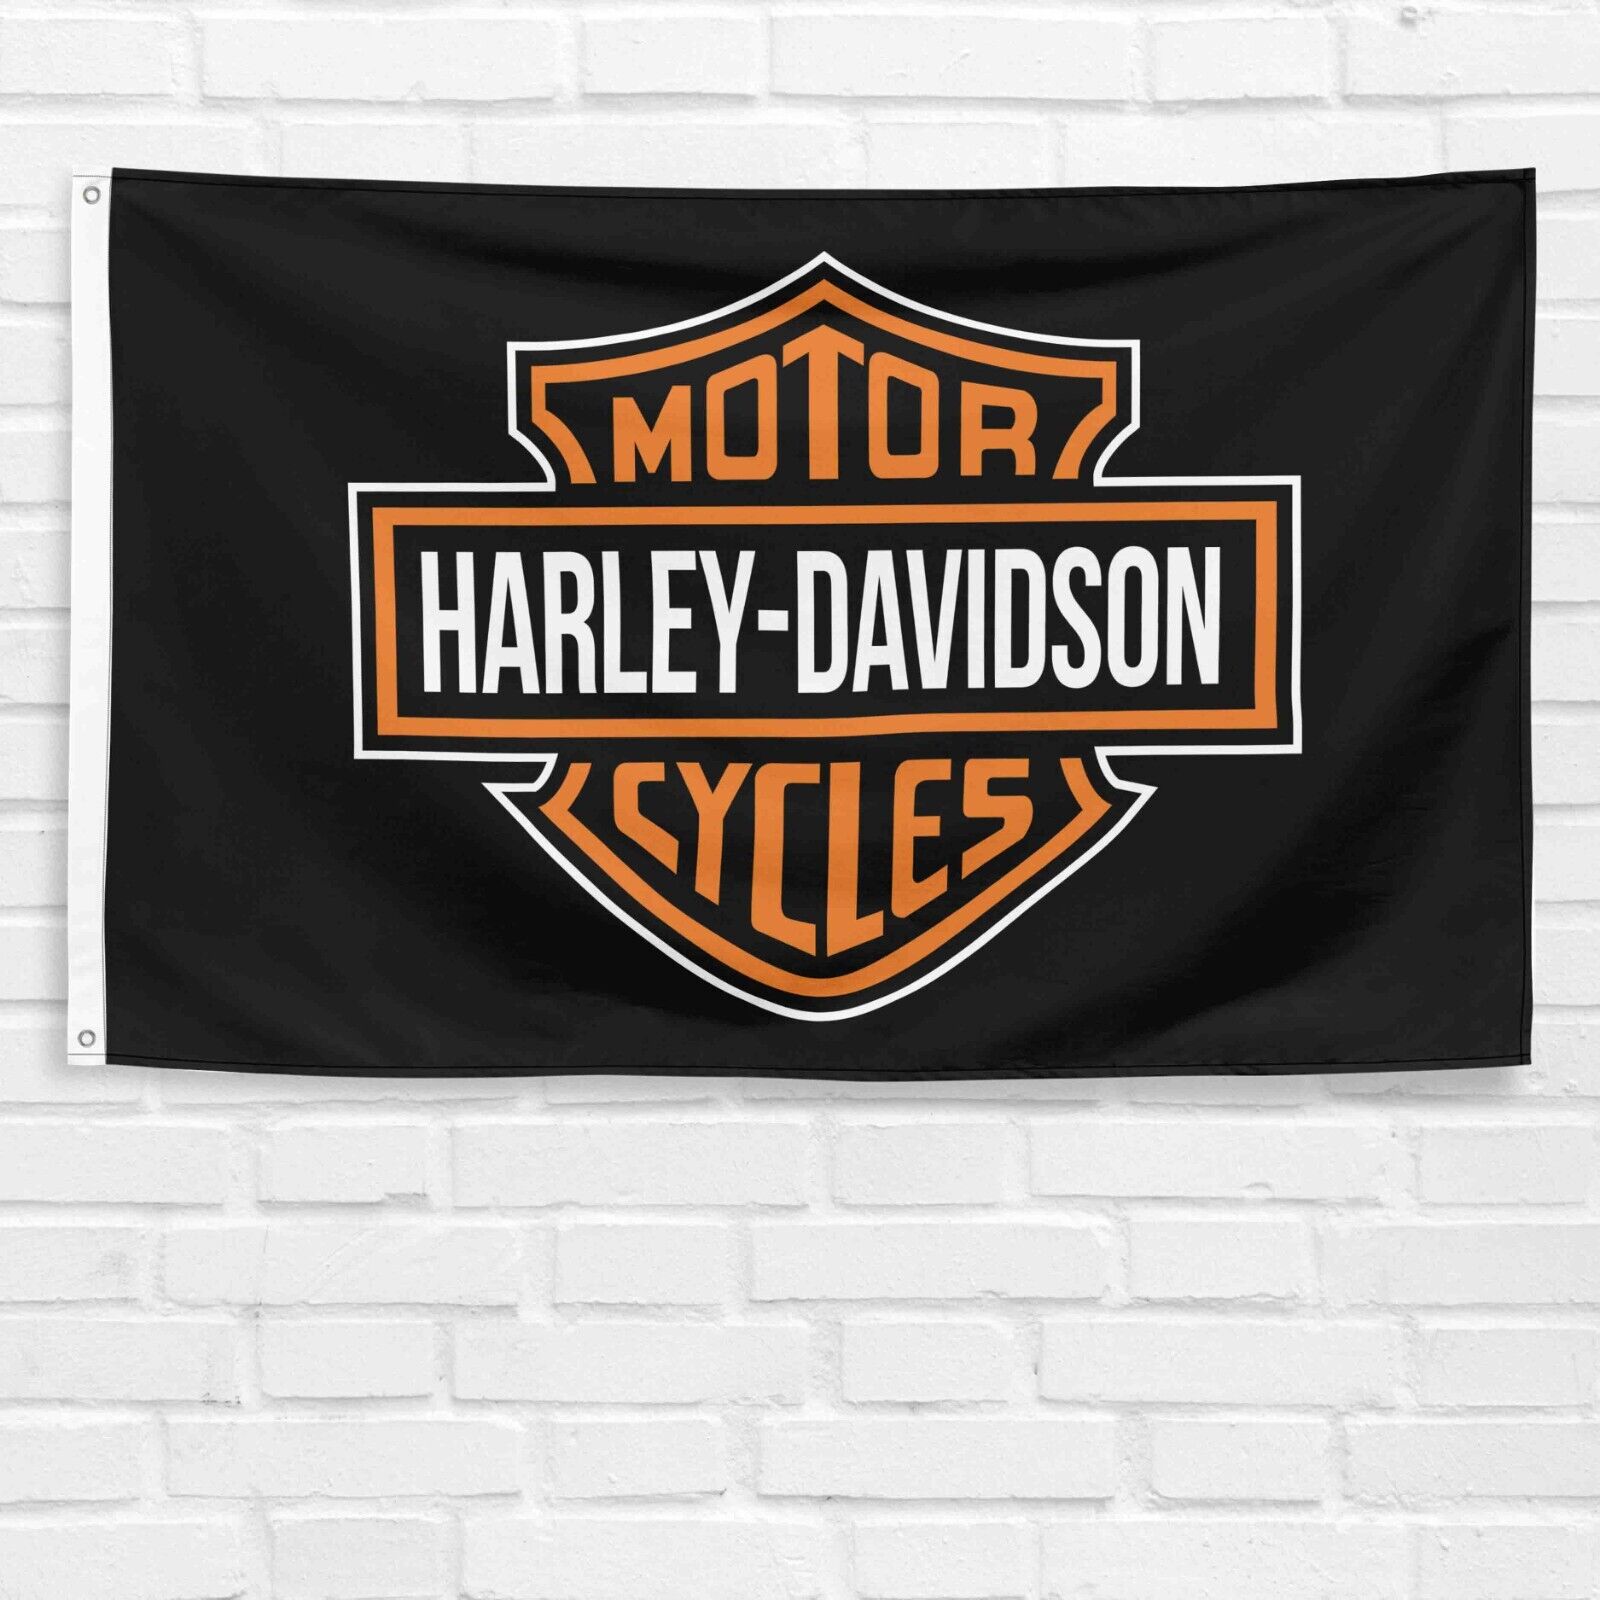 For Harley Davidson Motorcycle Enthusiasts 3x5 ft Flag Garage Wall Banner Gift